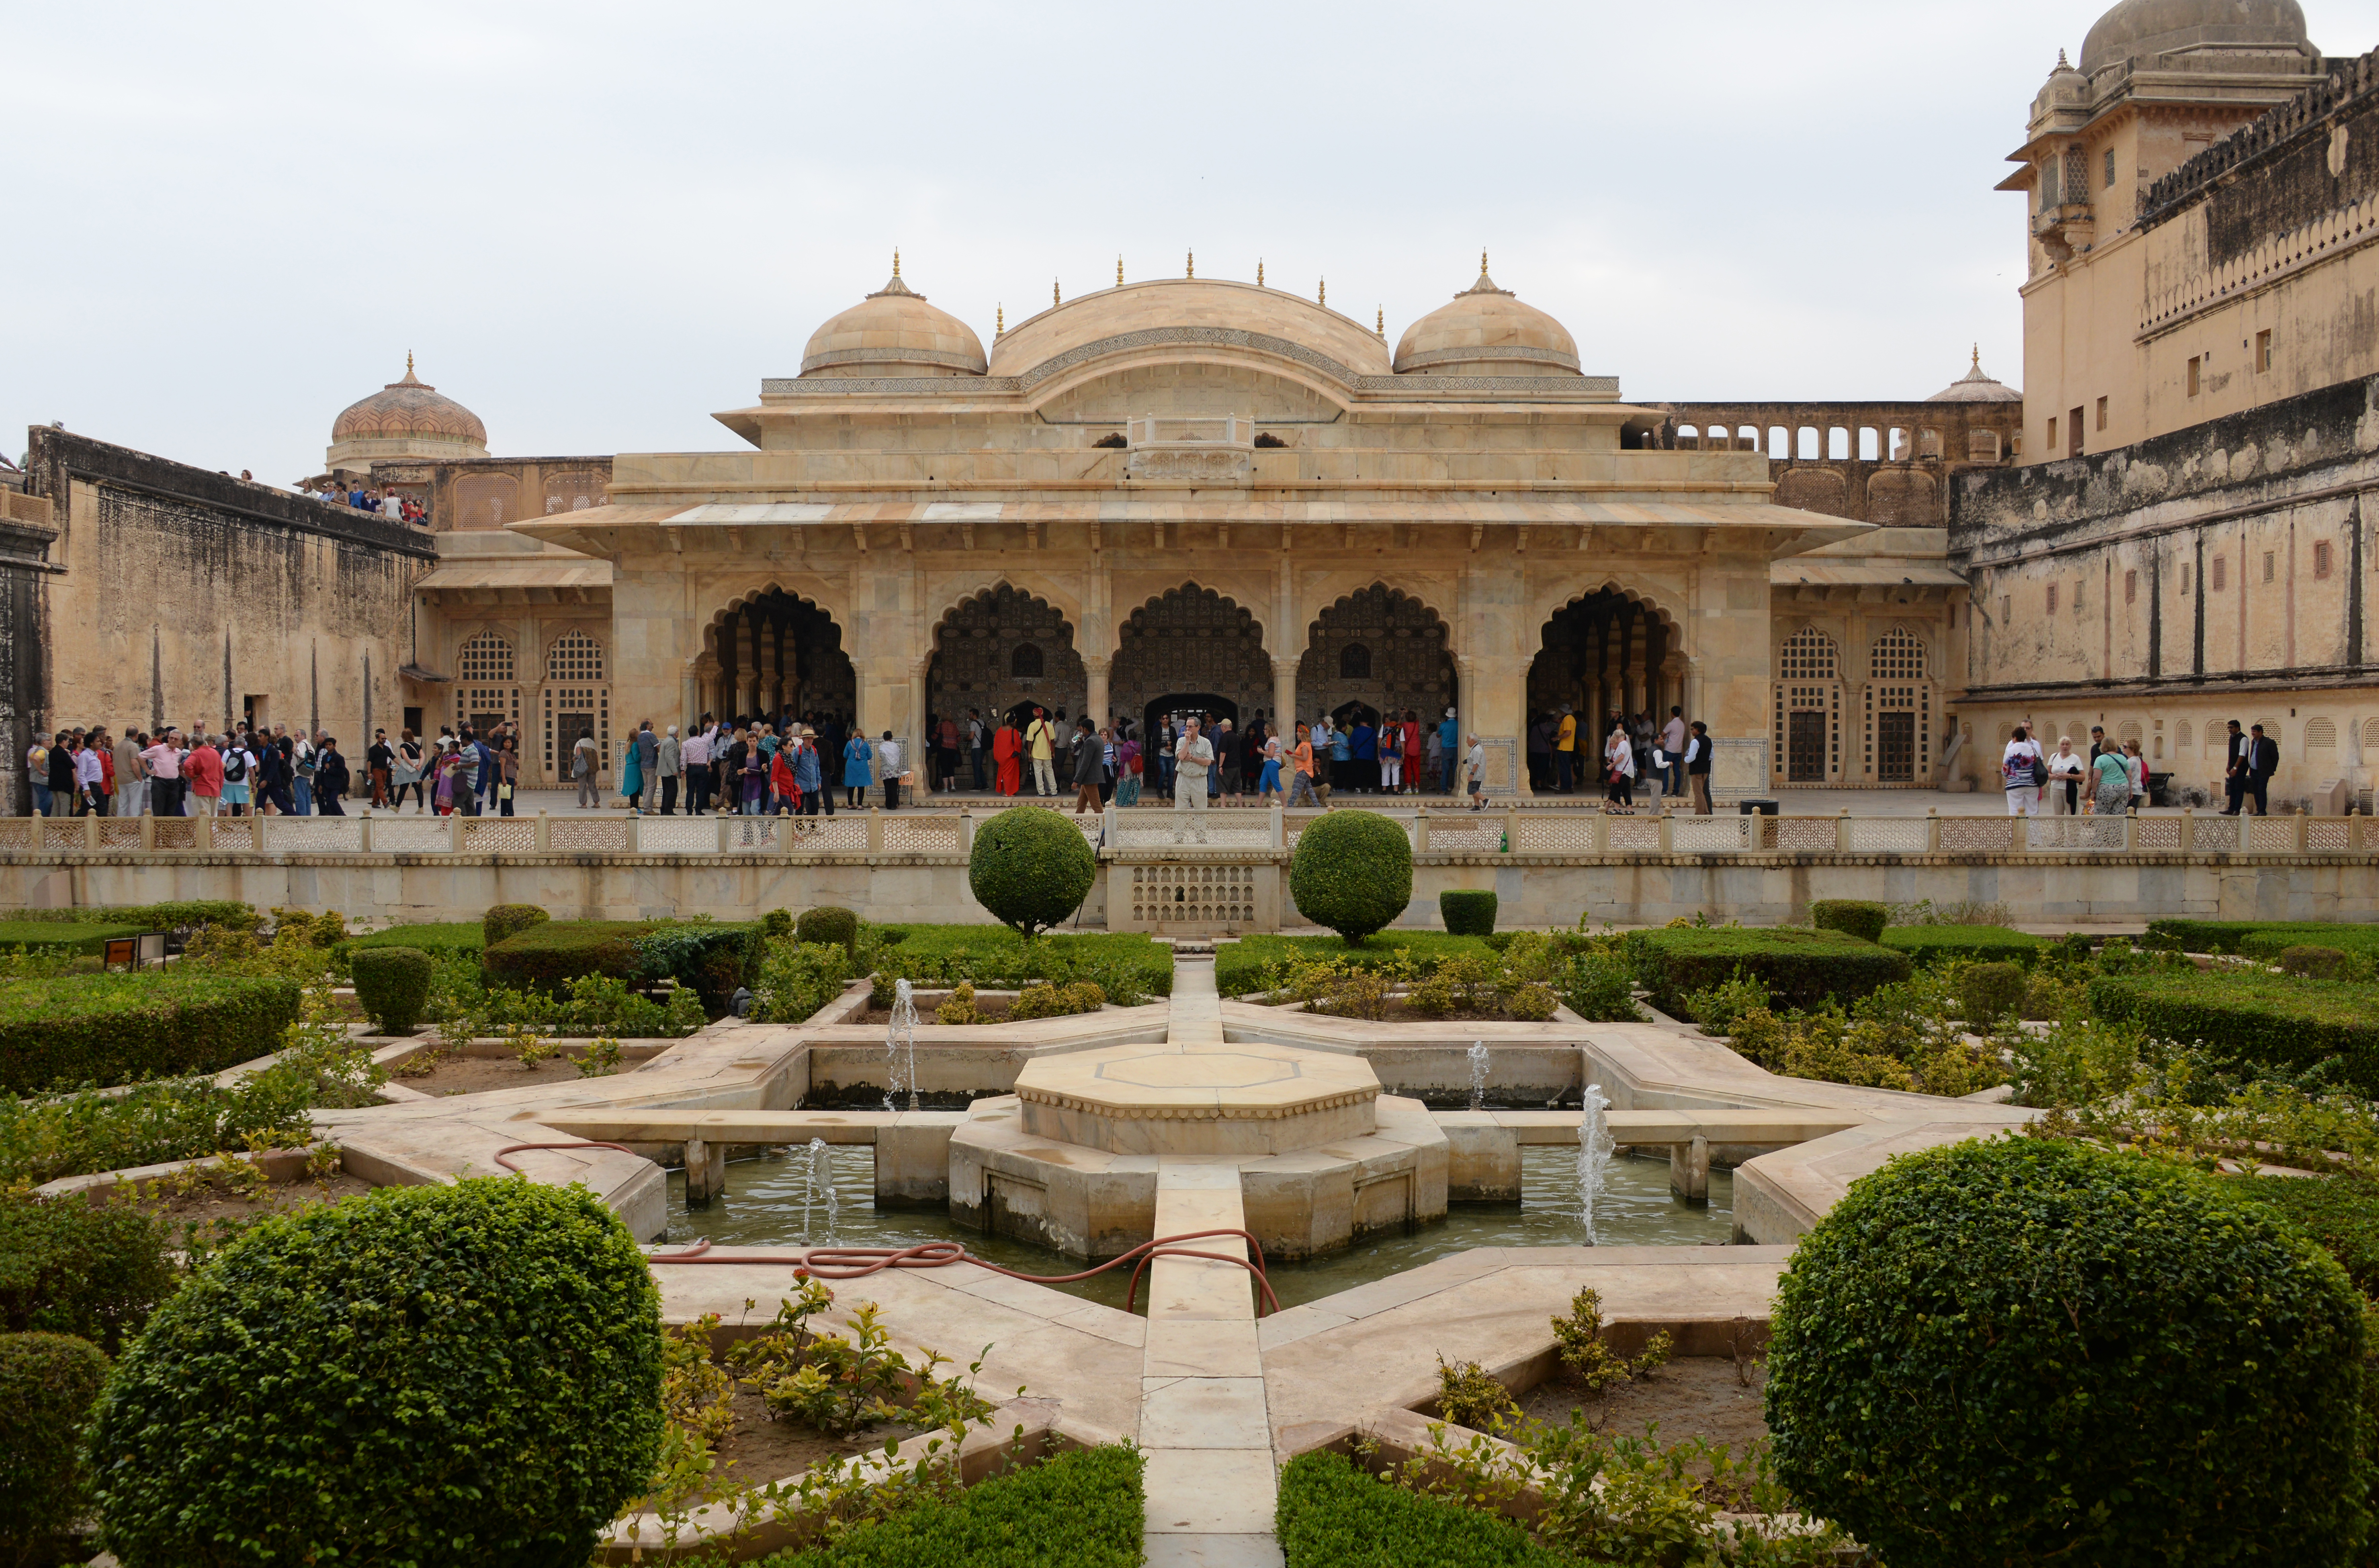 The Diwan-i-Khas (Hall of Private Audience) in Amer fort Jaipur